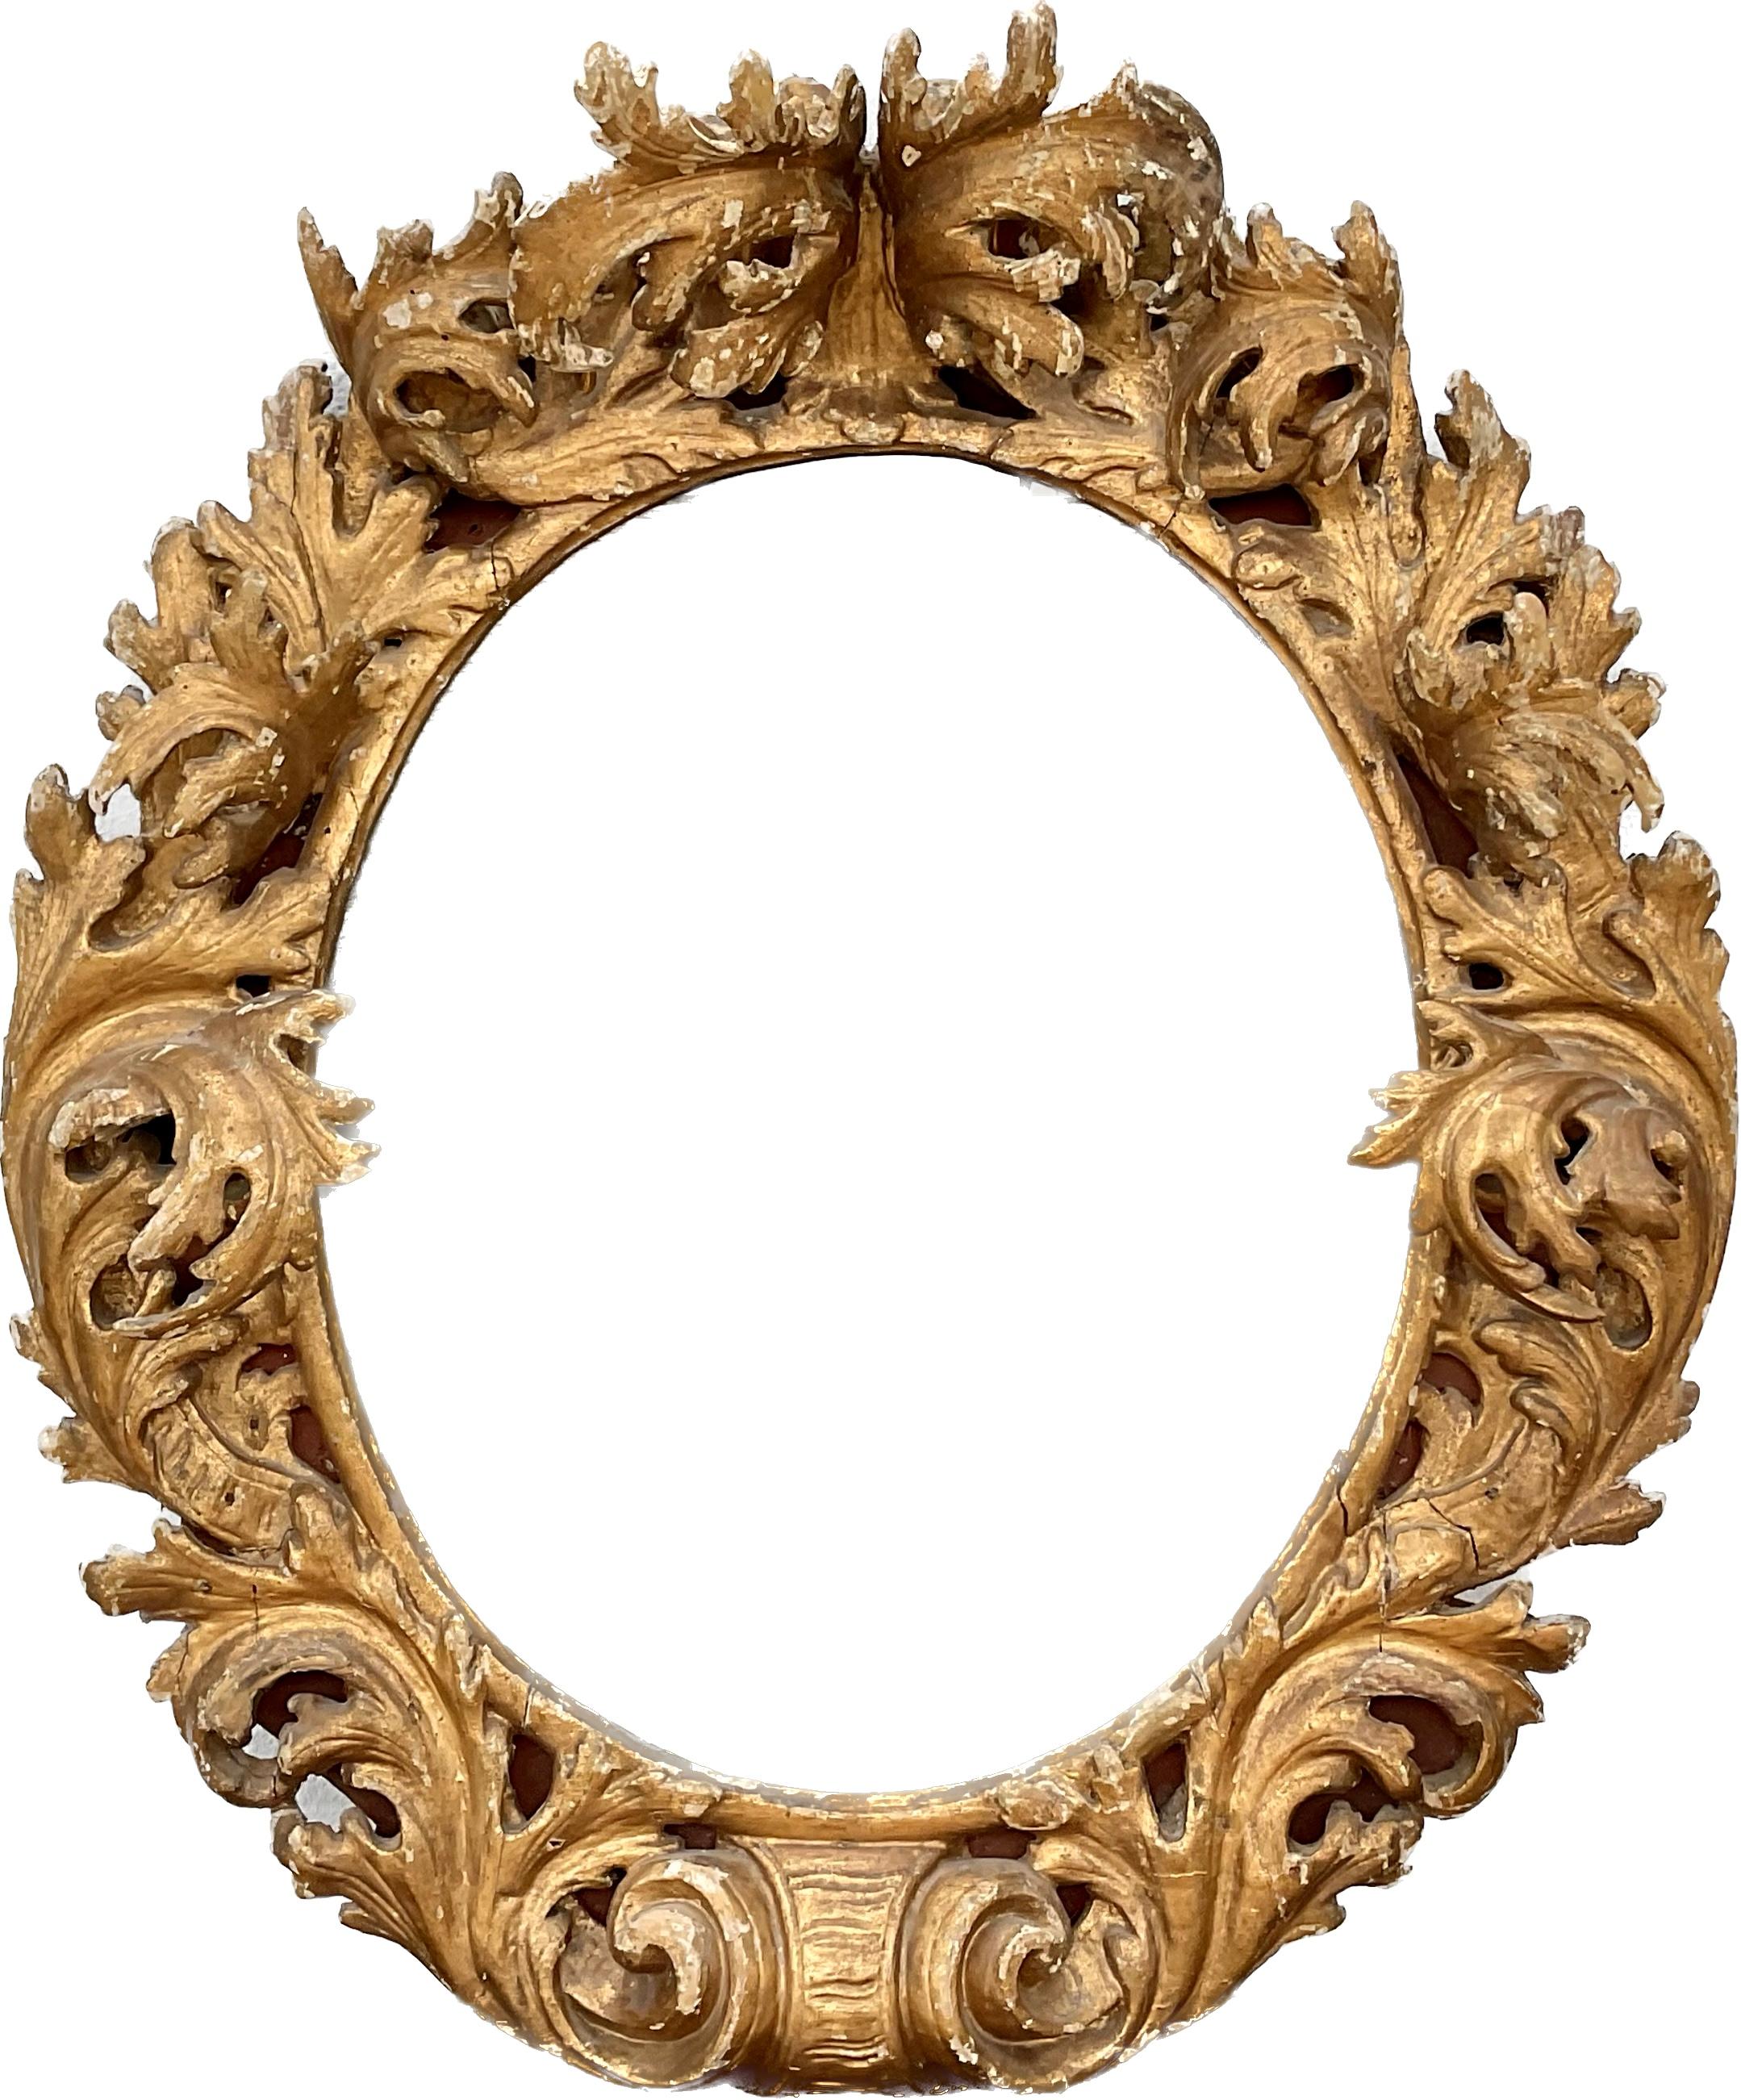 17/18th century heavily hand carved Italian or Spanish Rococo giltwood wall mirror. Mirror is on an oval plate surrounded by carved scrolling acanthus leaves protruding 10 inches or more from the frame. Very nice patina of the gilding. A truly